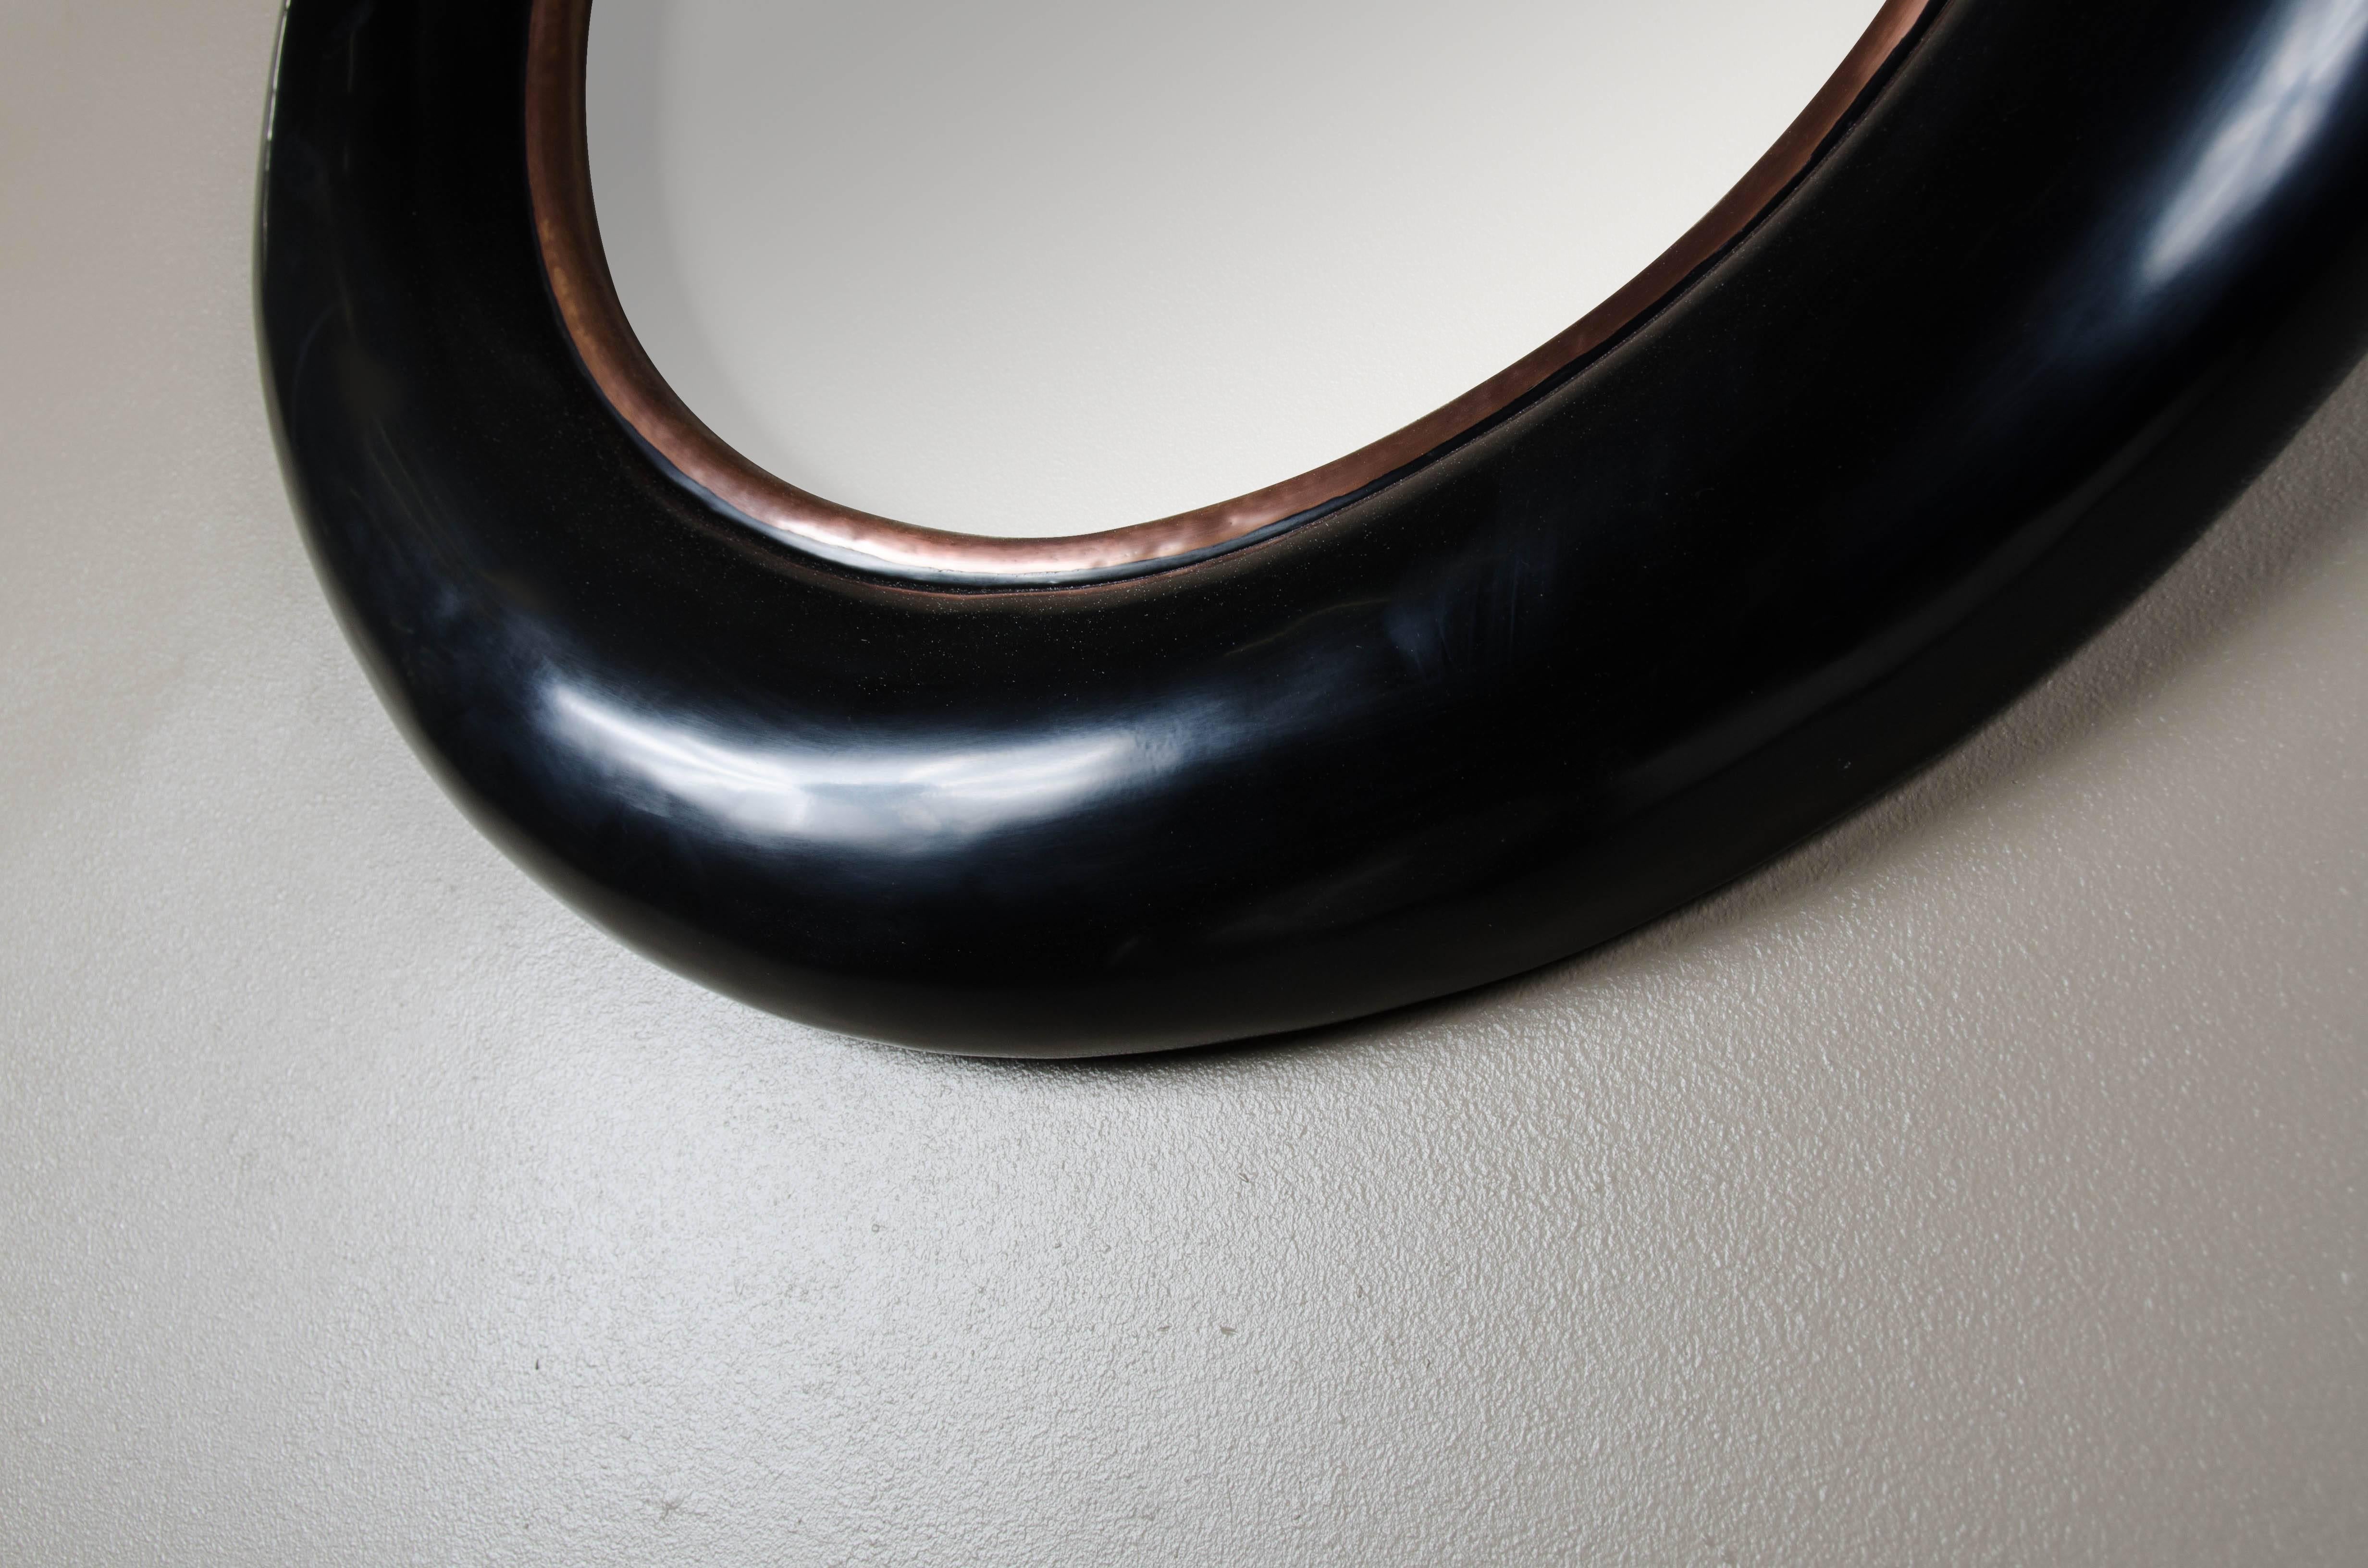 Repoussé Rounded Mirror with Copper Trim by Robert Kuo, Black Lacquer, Limited Edition